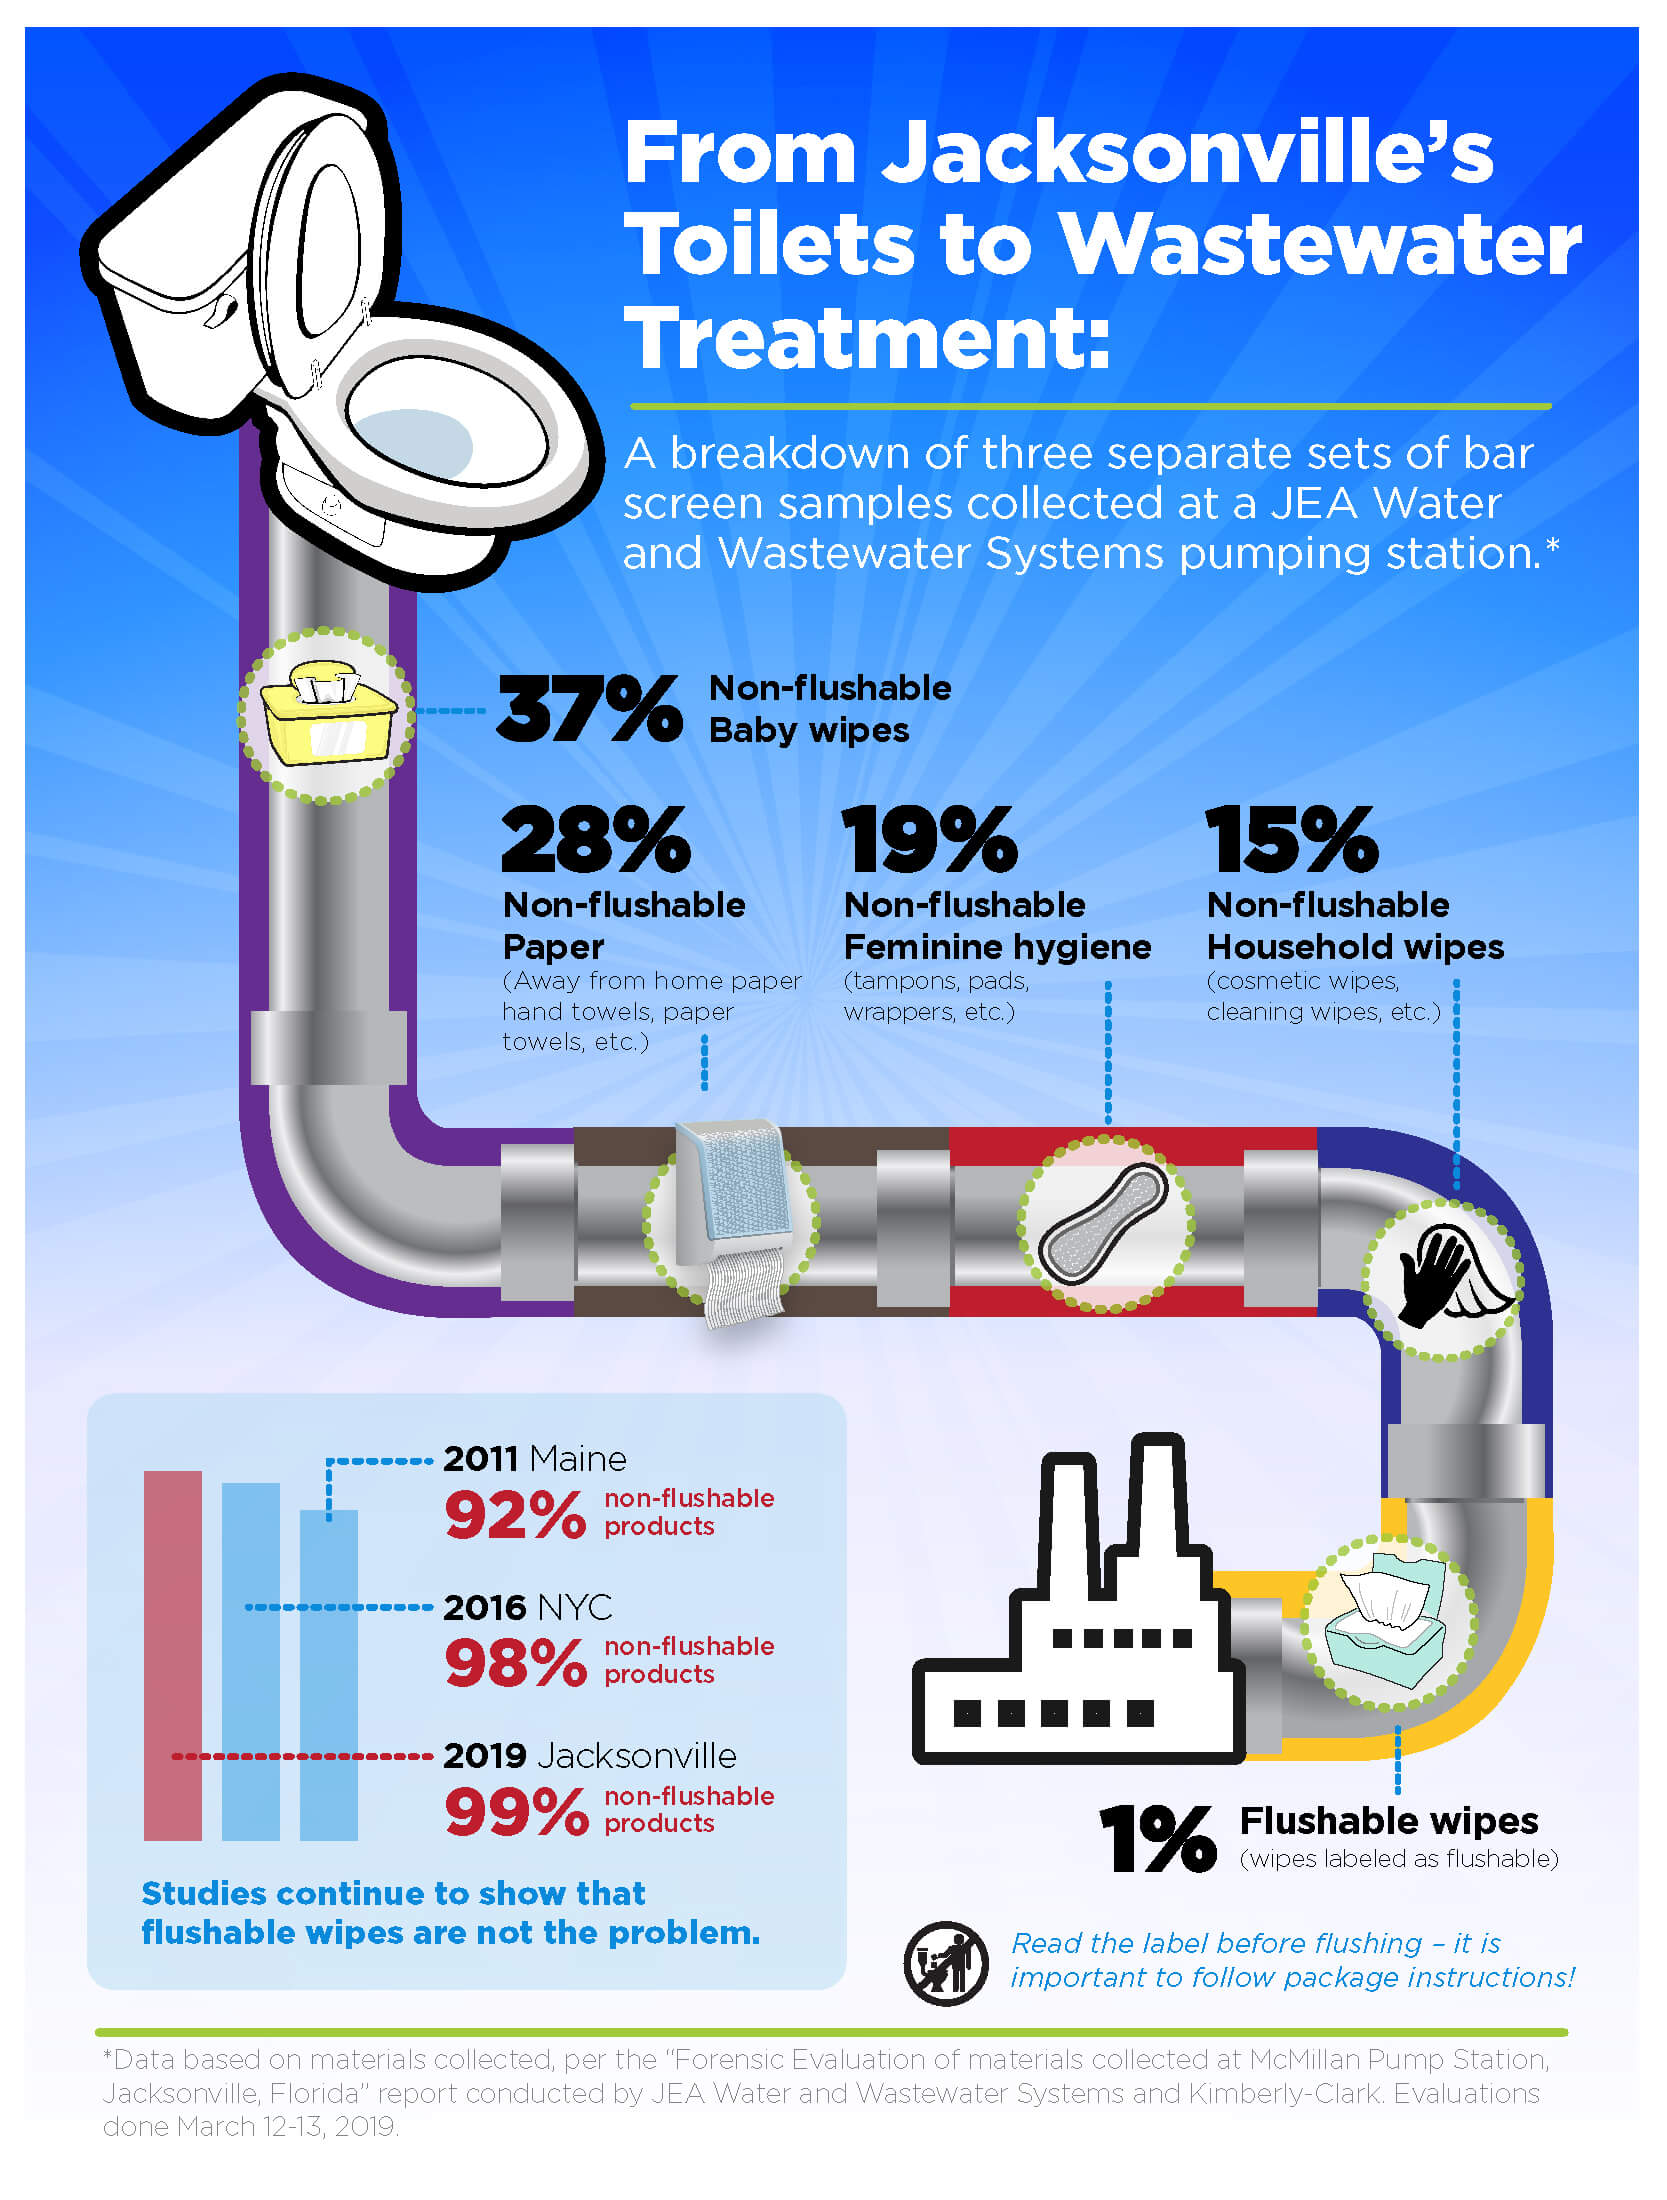 From Jacksonville's Toilet to Wastewater Treatment Flyer